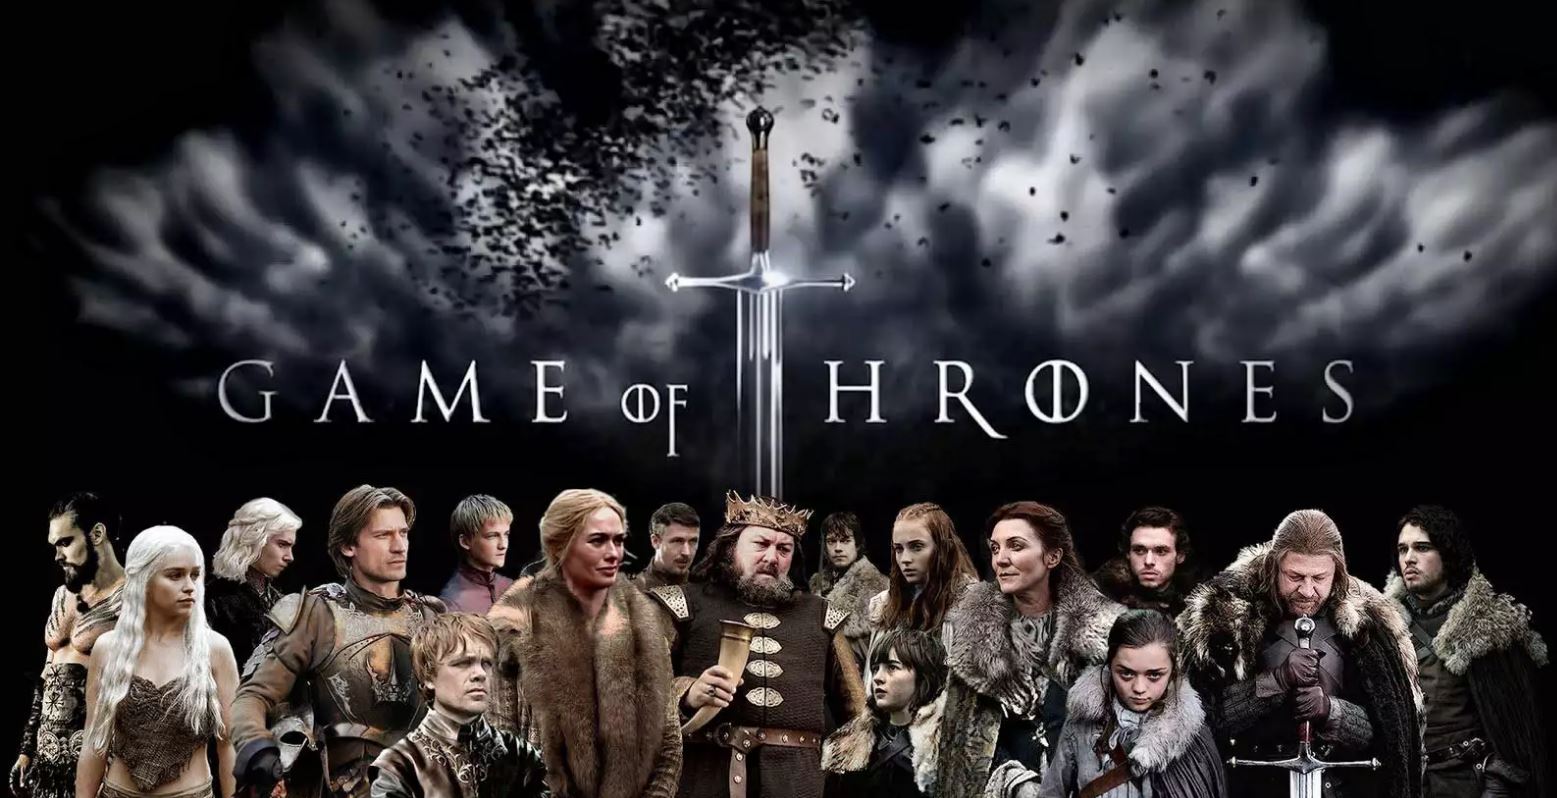 game of thrones season 4 all episodes download 480p